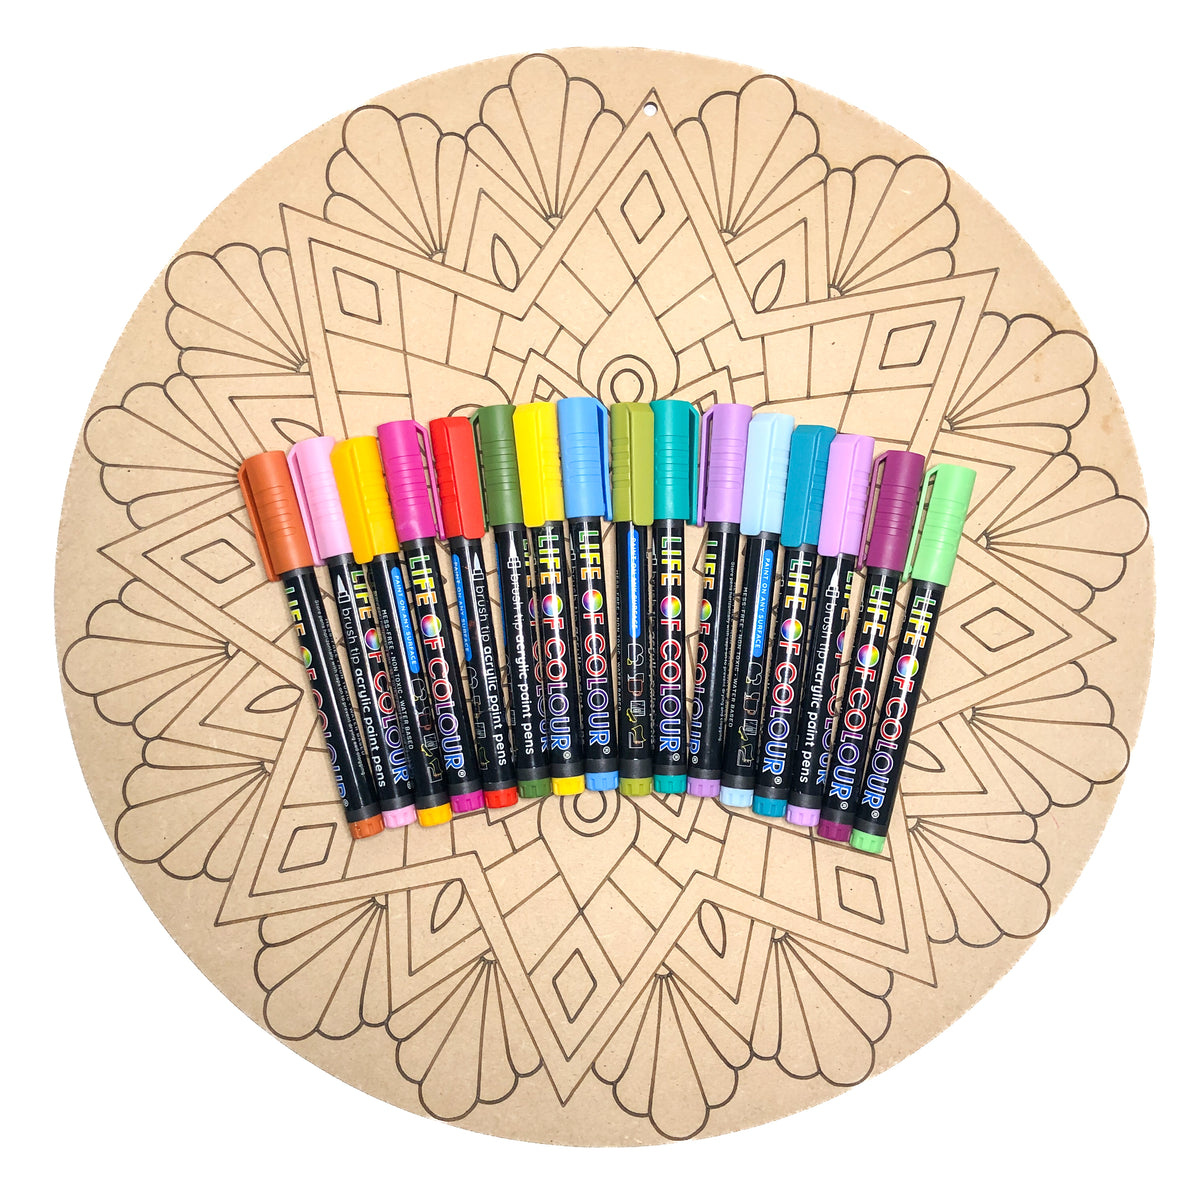 Life of Colour Mandala Painting Kit - The Beach (Florals)